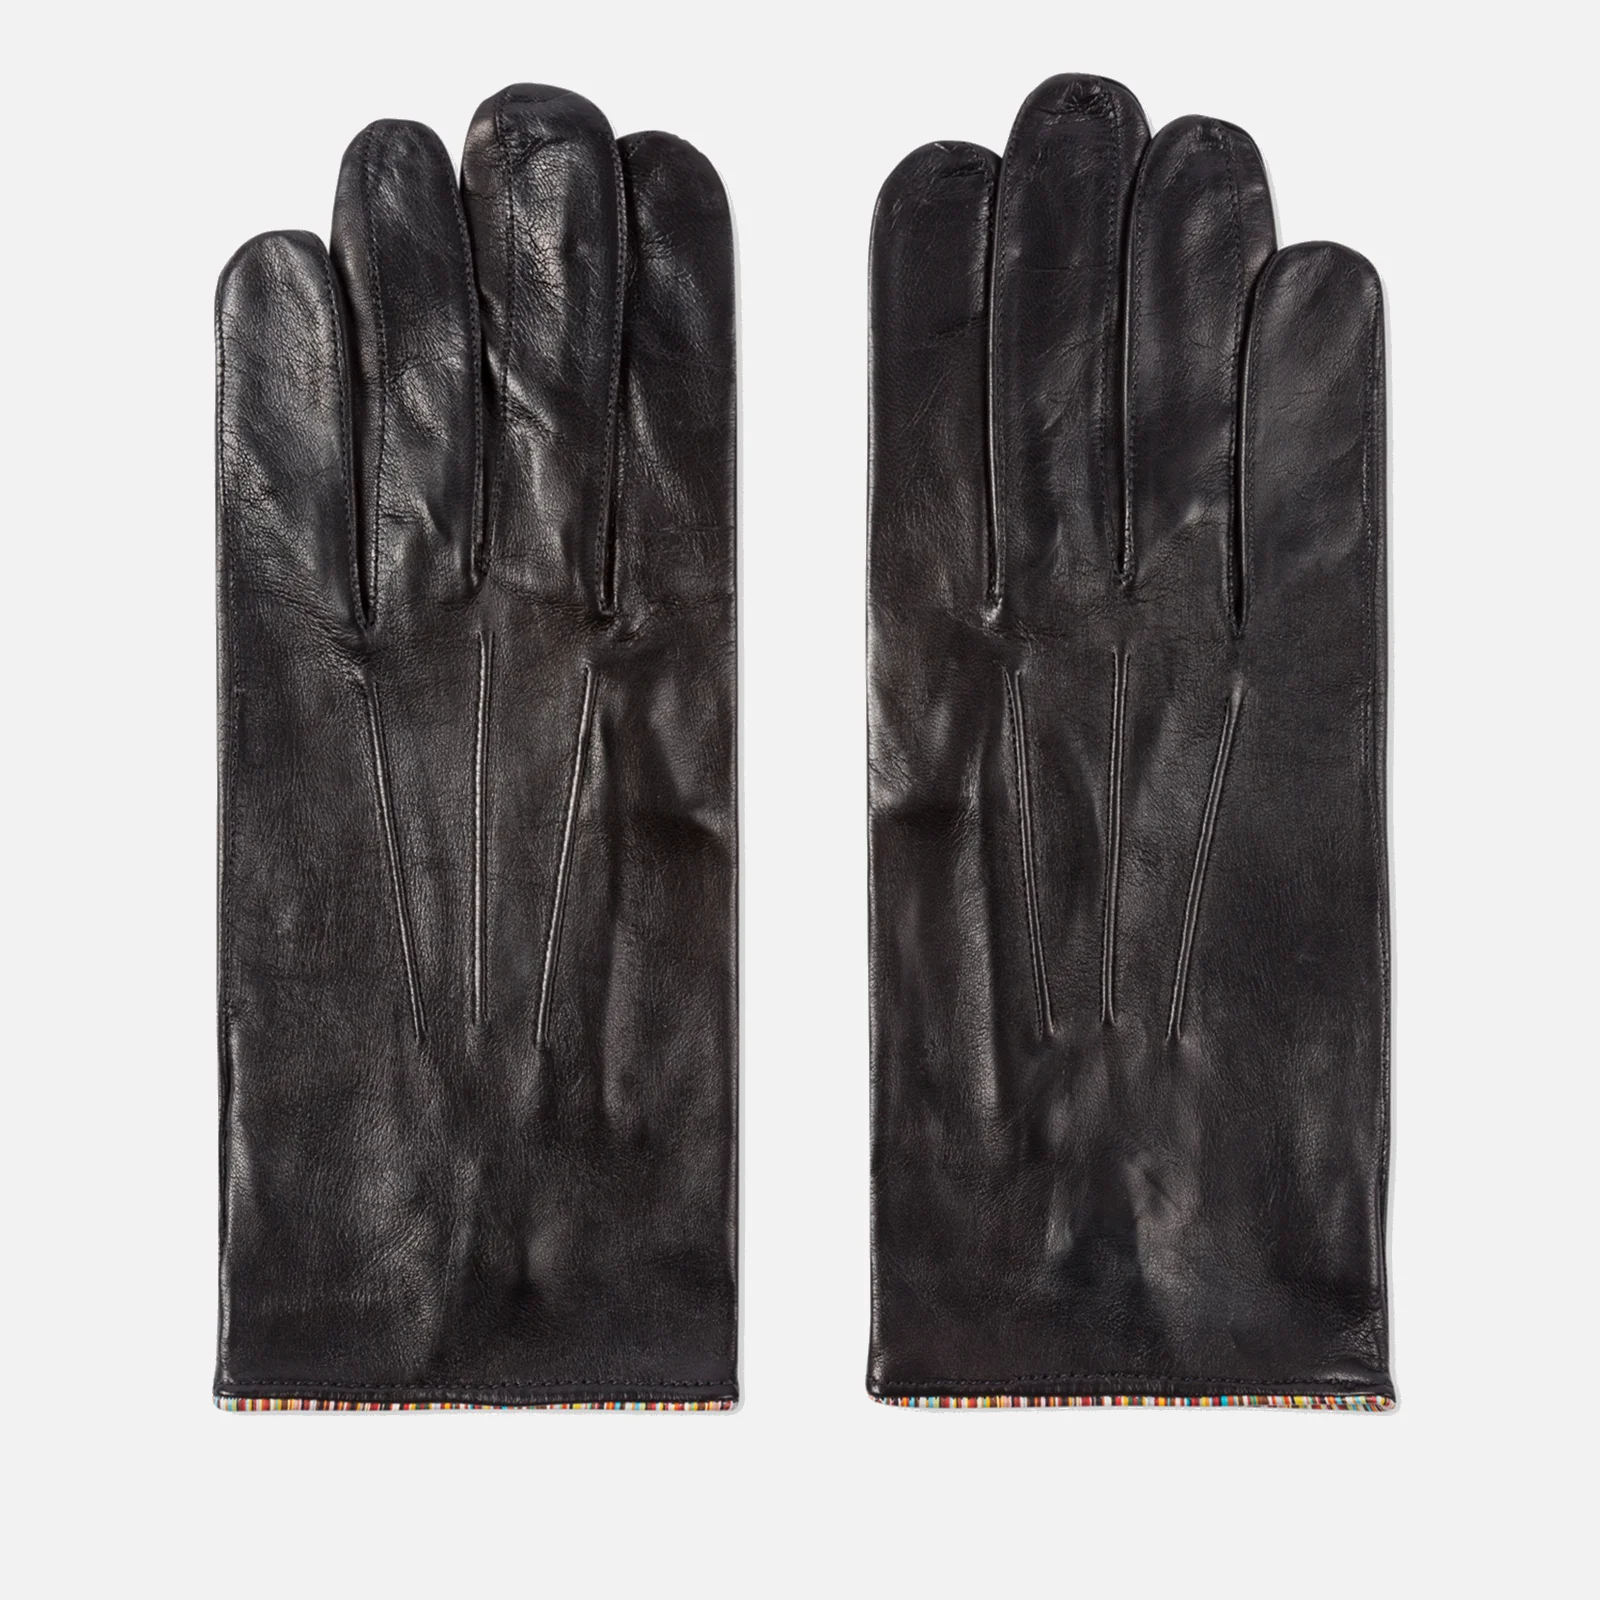 Paul Smith Leather Gloves Image 1